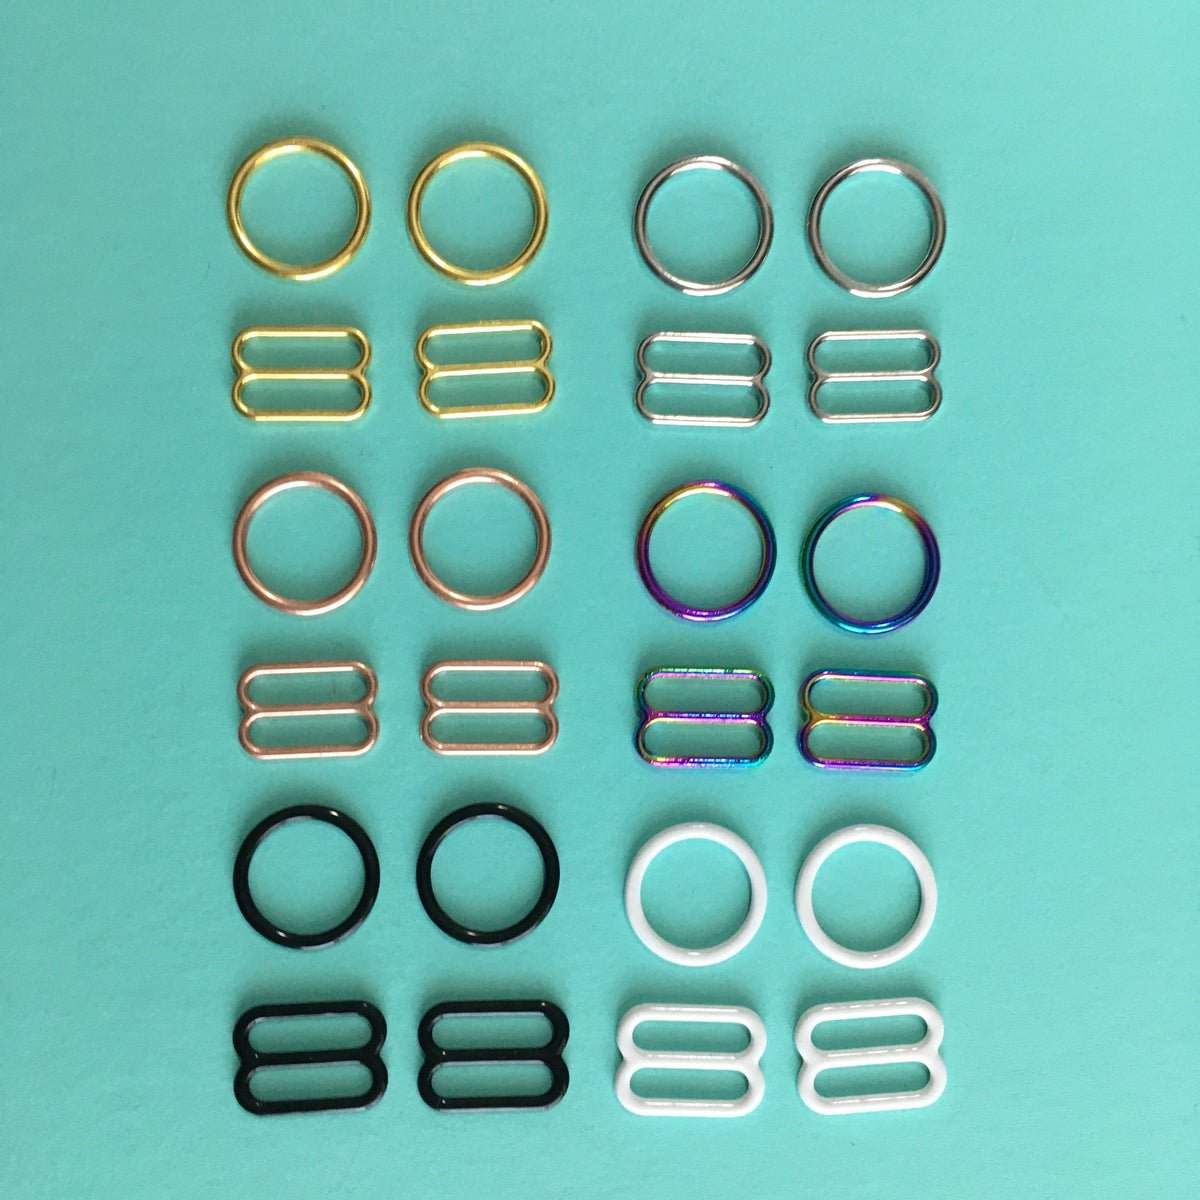 Set of Silver-Colored Metal Rings and Sliders